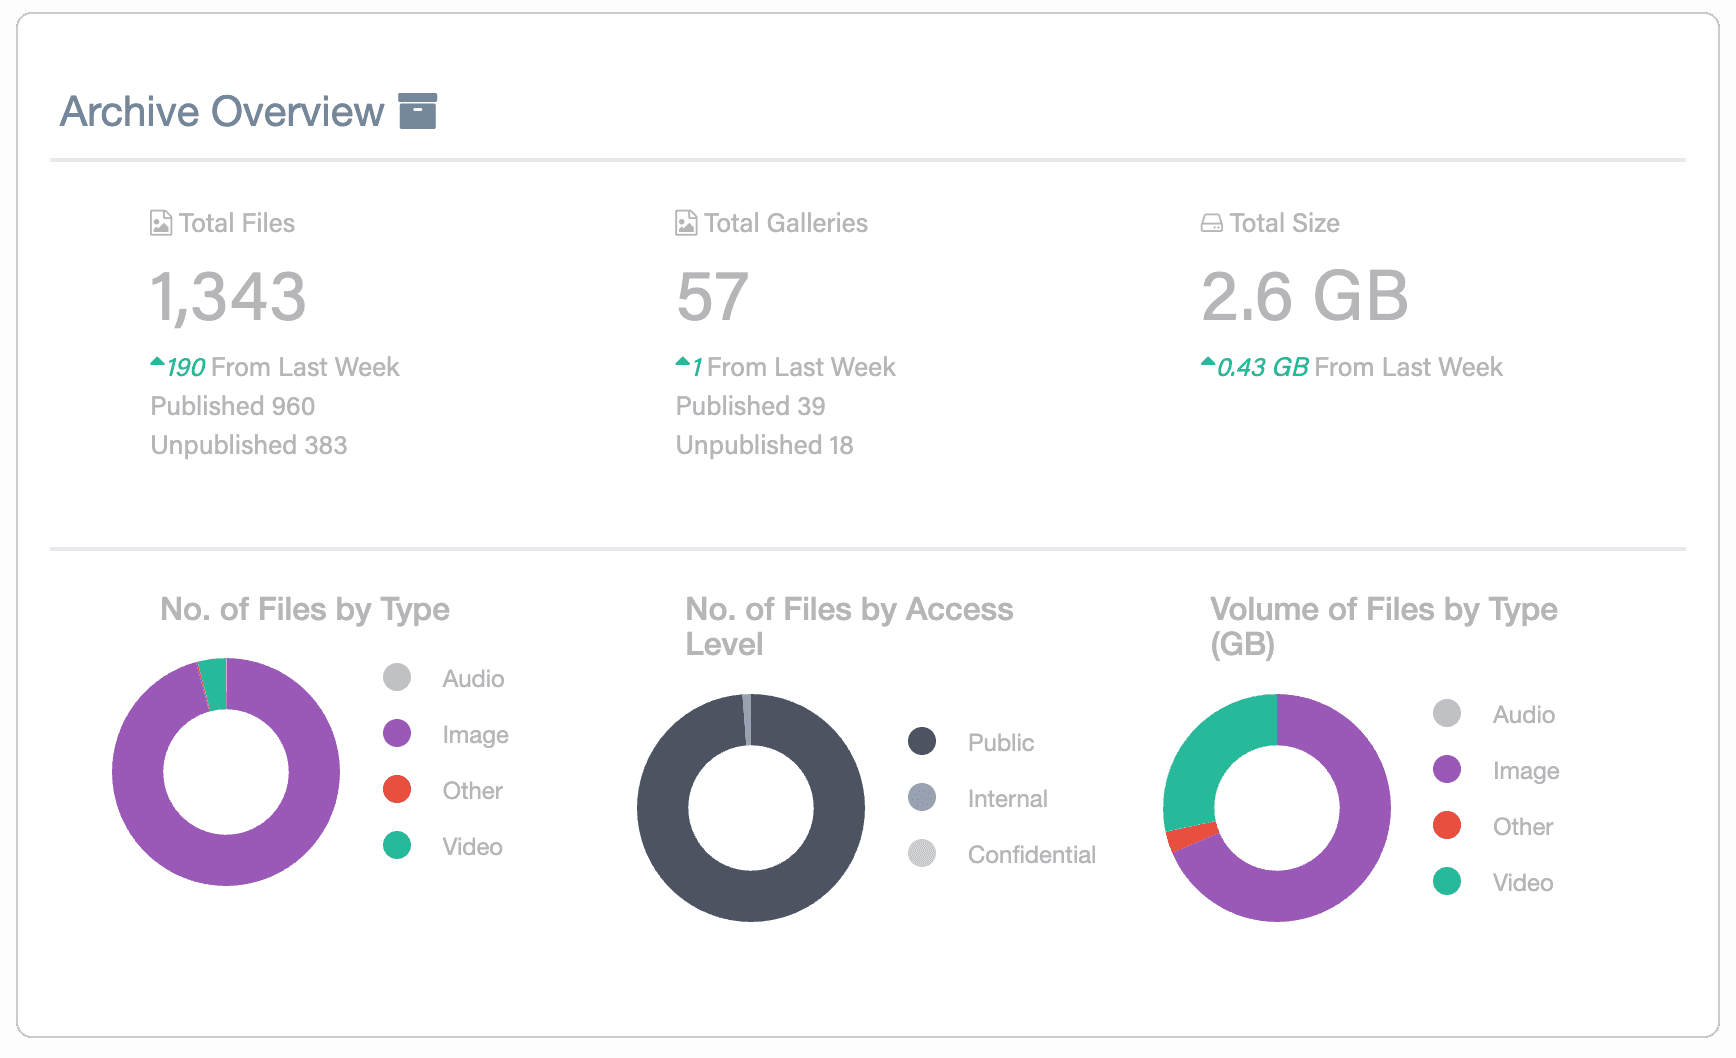 See an overview of your archive using the admin dashboard.